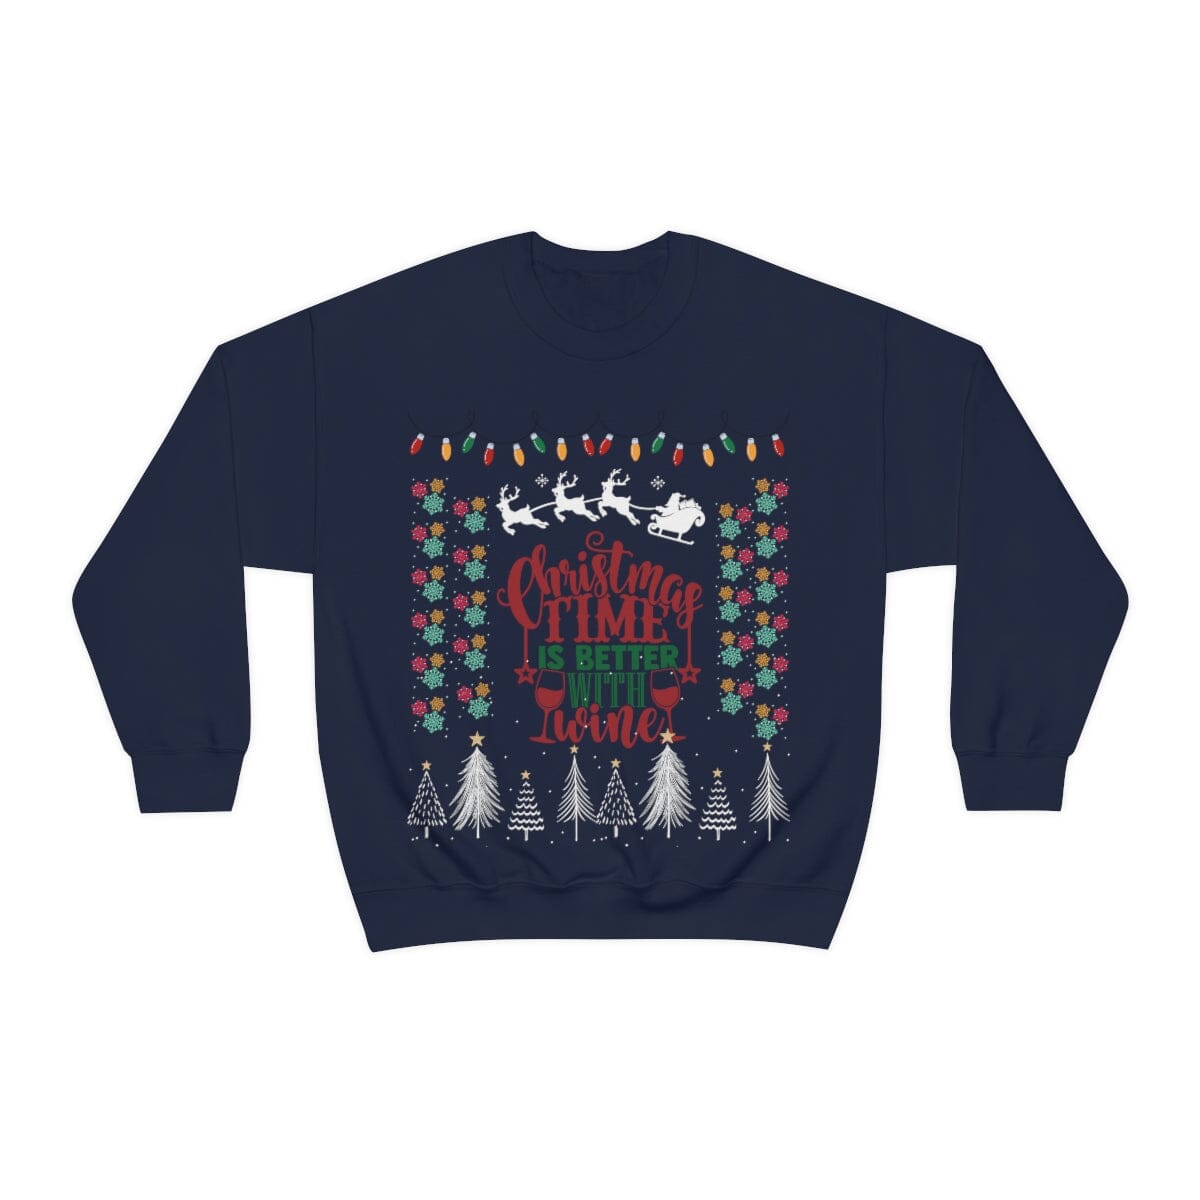 Ugly Christmas Sweater - Christmas Time is better with Wine Sweatshirt Printify S Navy 